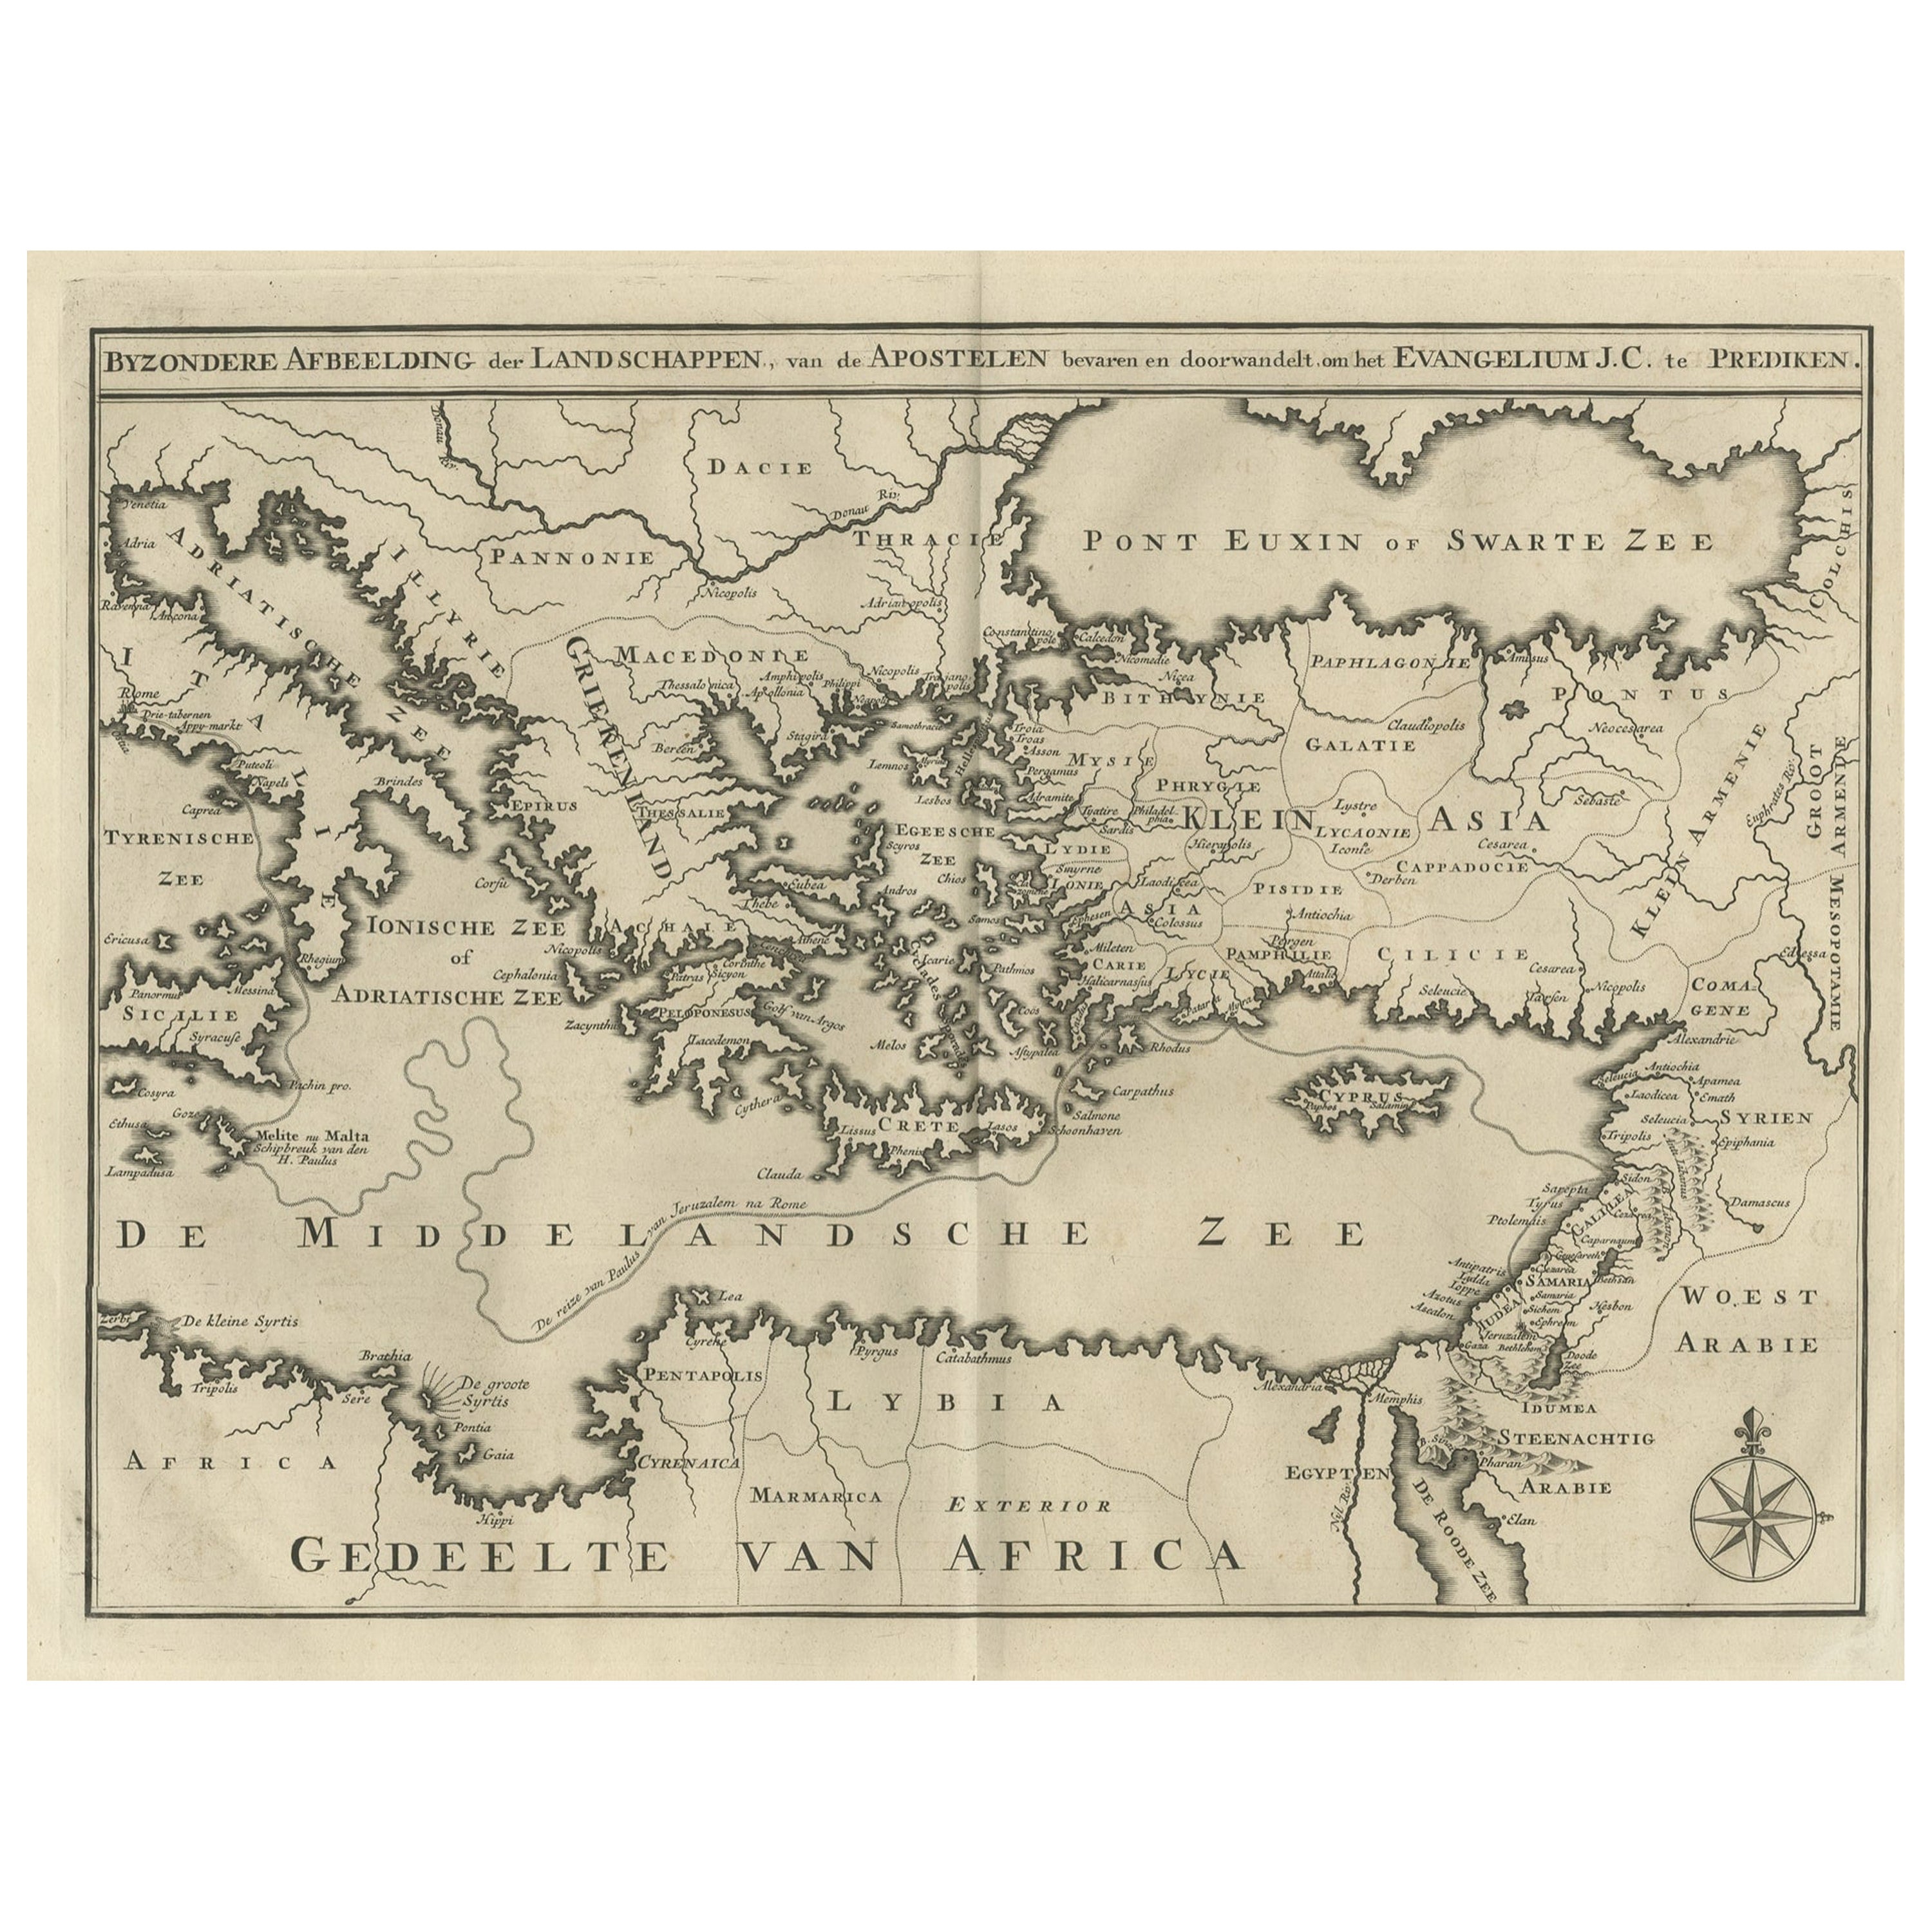 Antique Map of Eastern Mediterranean and Asia Minor by a Benedictine, c.1725